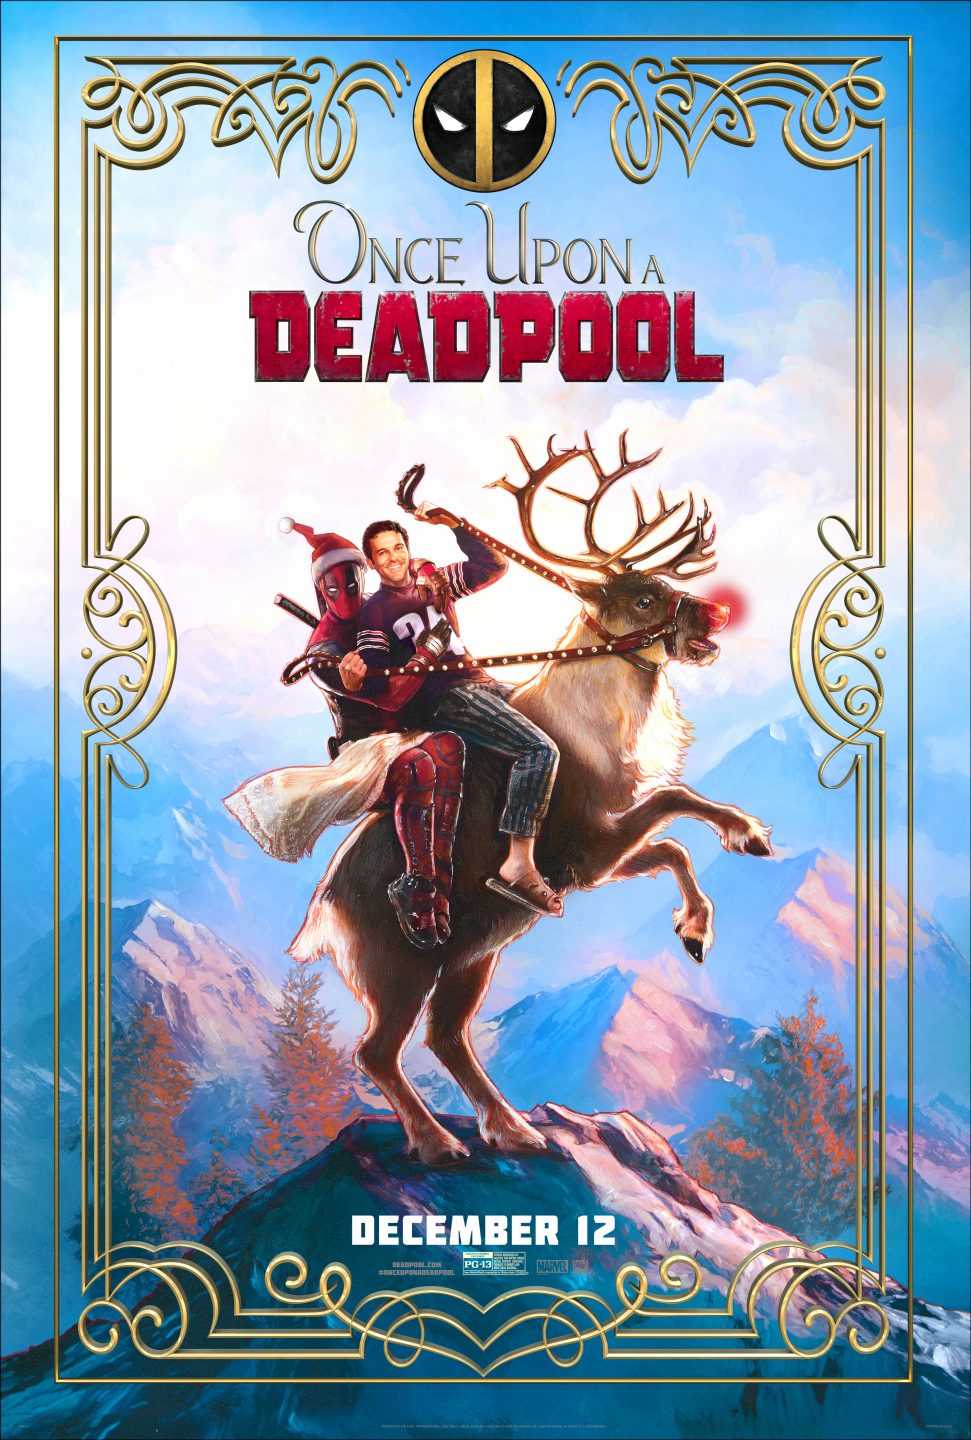 Once Upon A Deadpool poster (20th Century Fox)